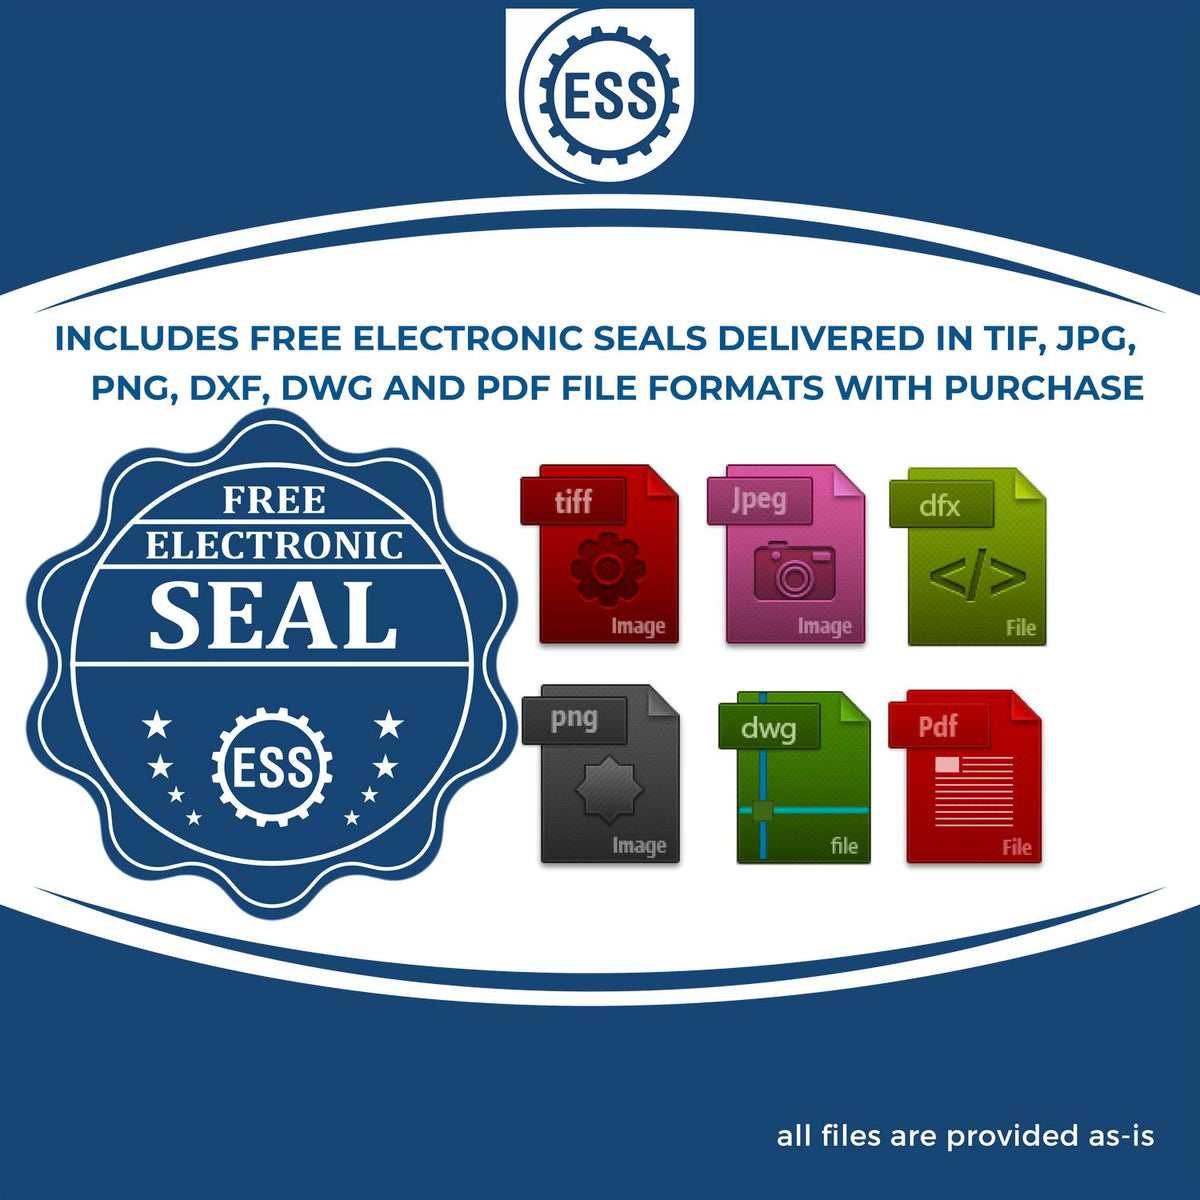 An infographic for the free electronic seal for the Heavy-Duty Vermont Rectangular Notary Stamp illustrating the different file type icons such as DXF, DWG, TIF, JPG and PNG.